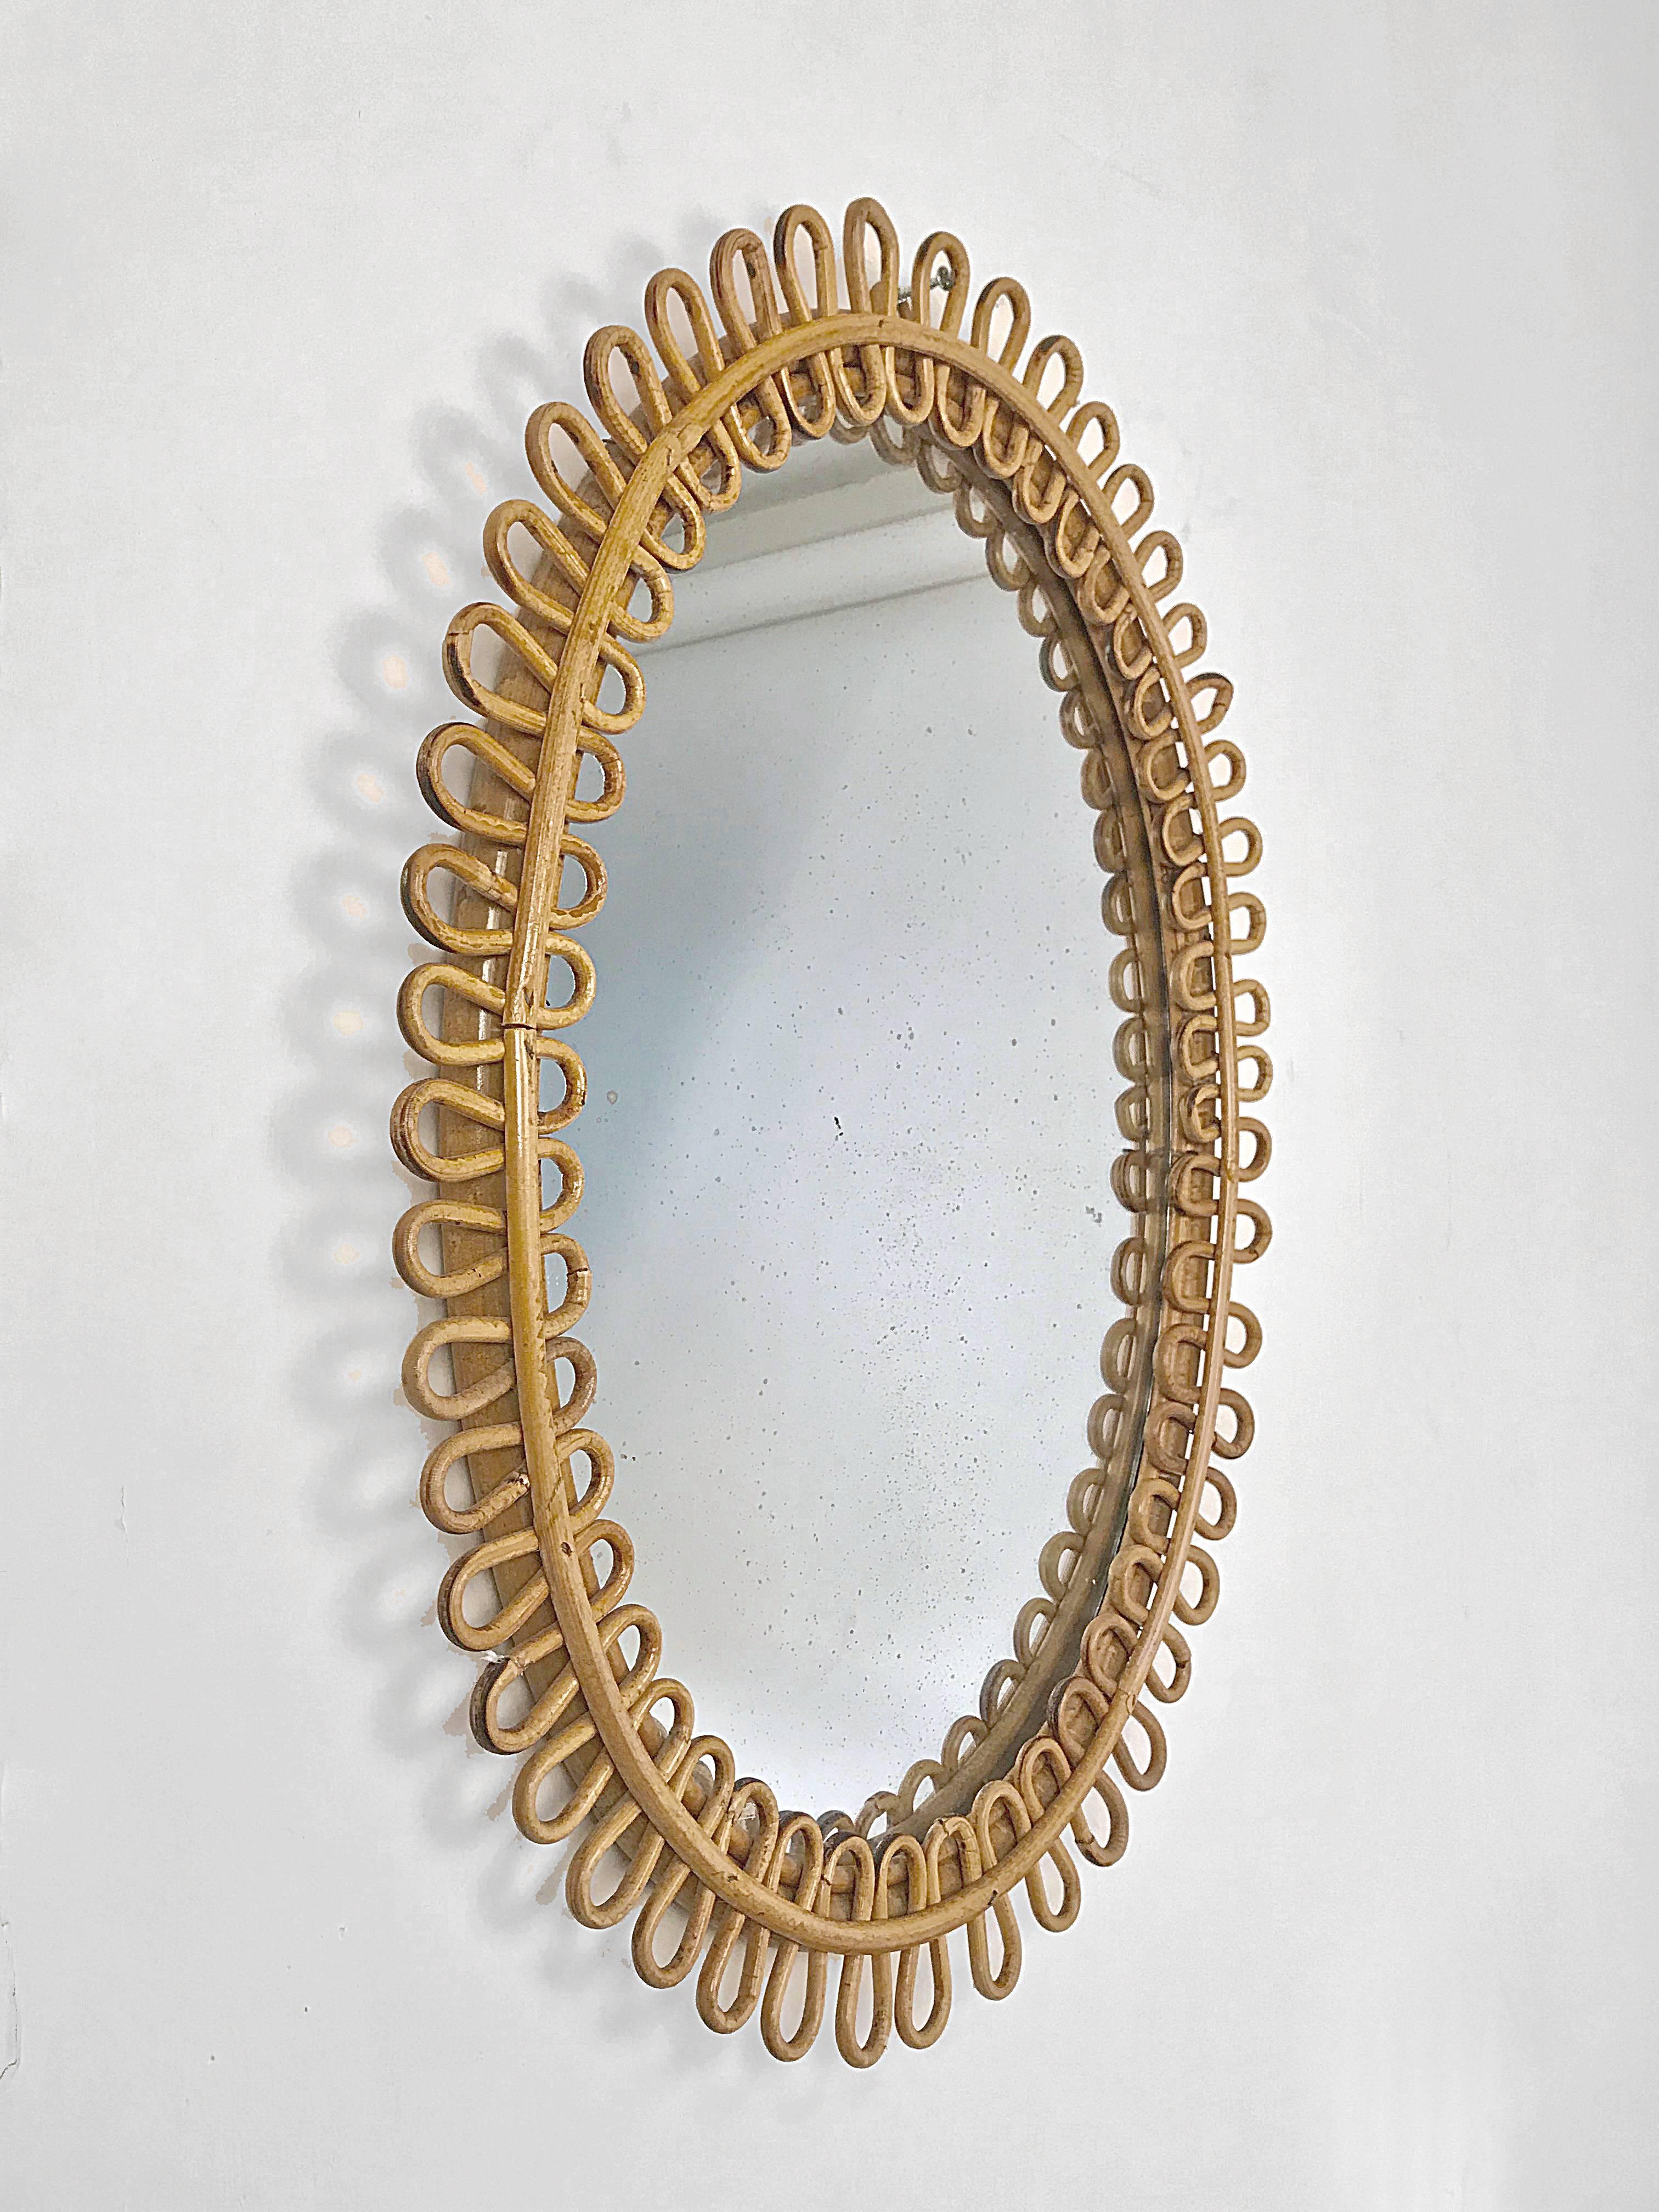 French Riviera oval wall mirror in bamboo and rattan, 1960s Mid-Century
Cm 58x44